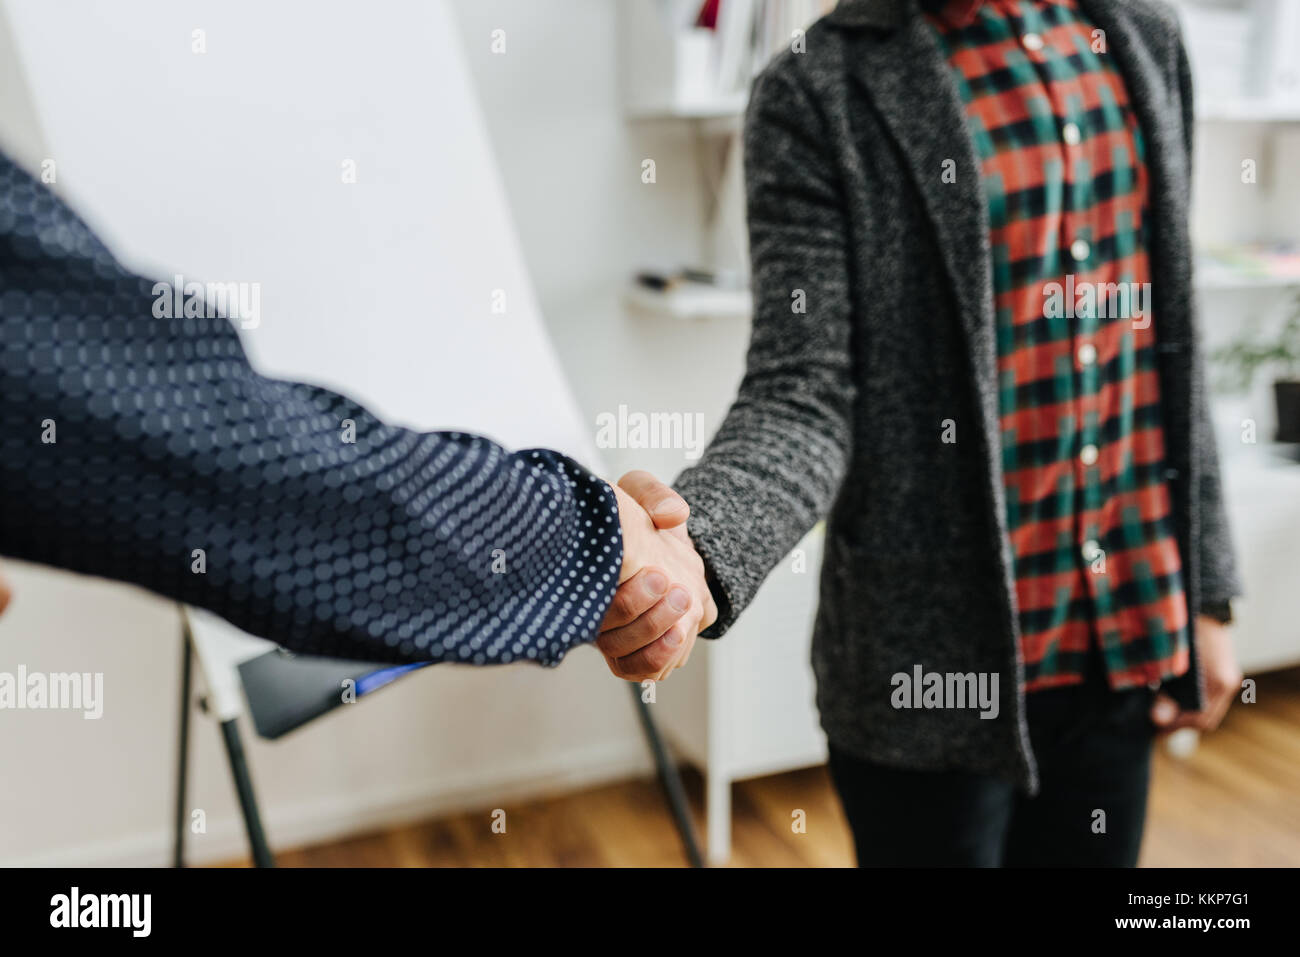 Businessman welcoming new client with a firm handshake Stock Photo